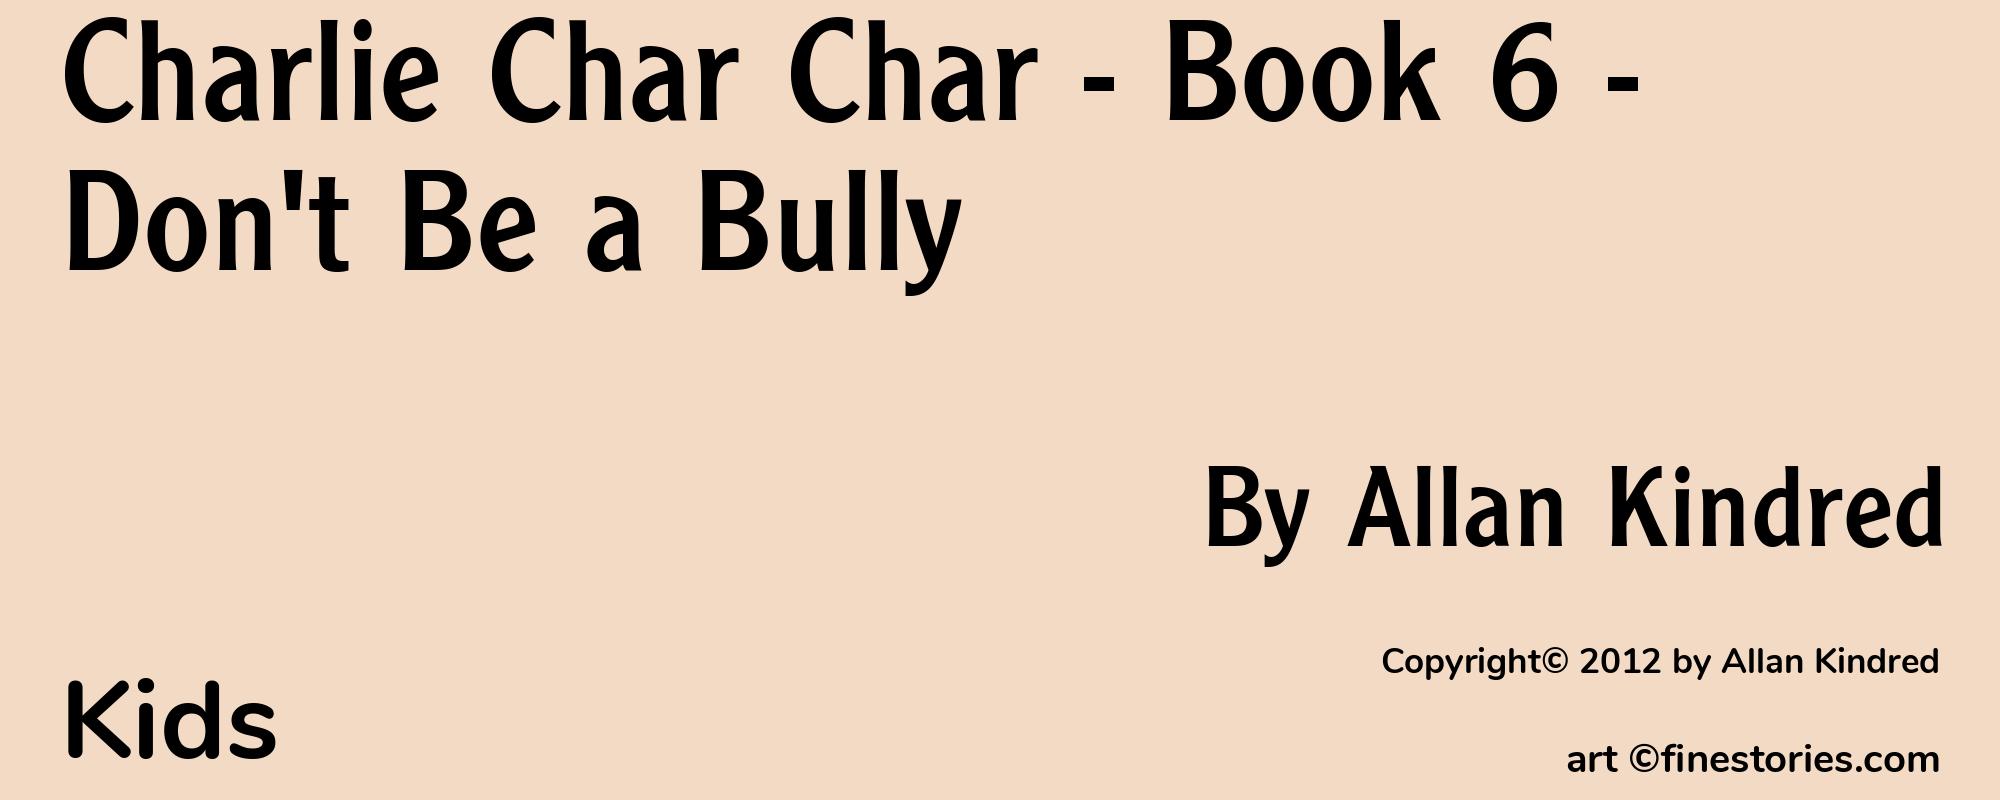 Charlie Char Char - Book 6 - Don't Be a Bully - Cover